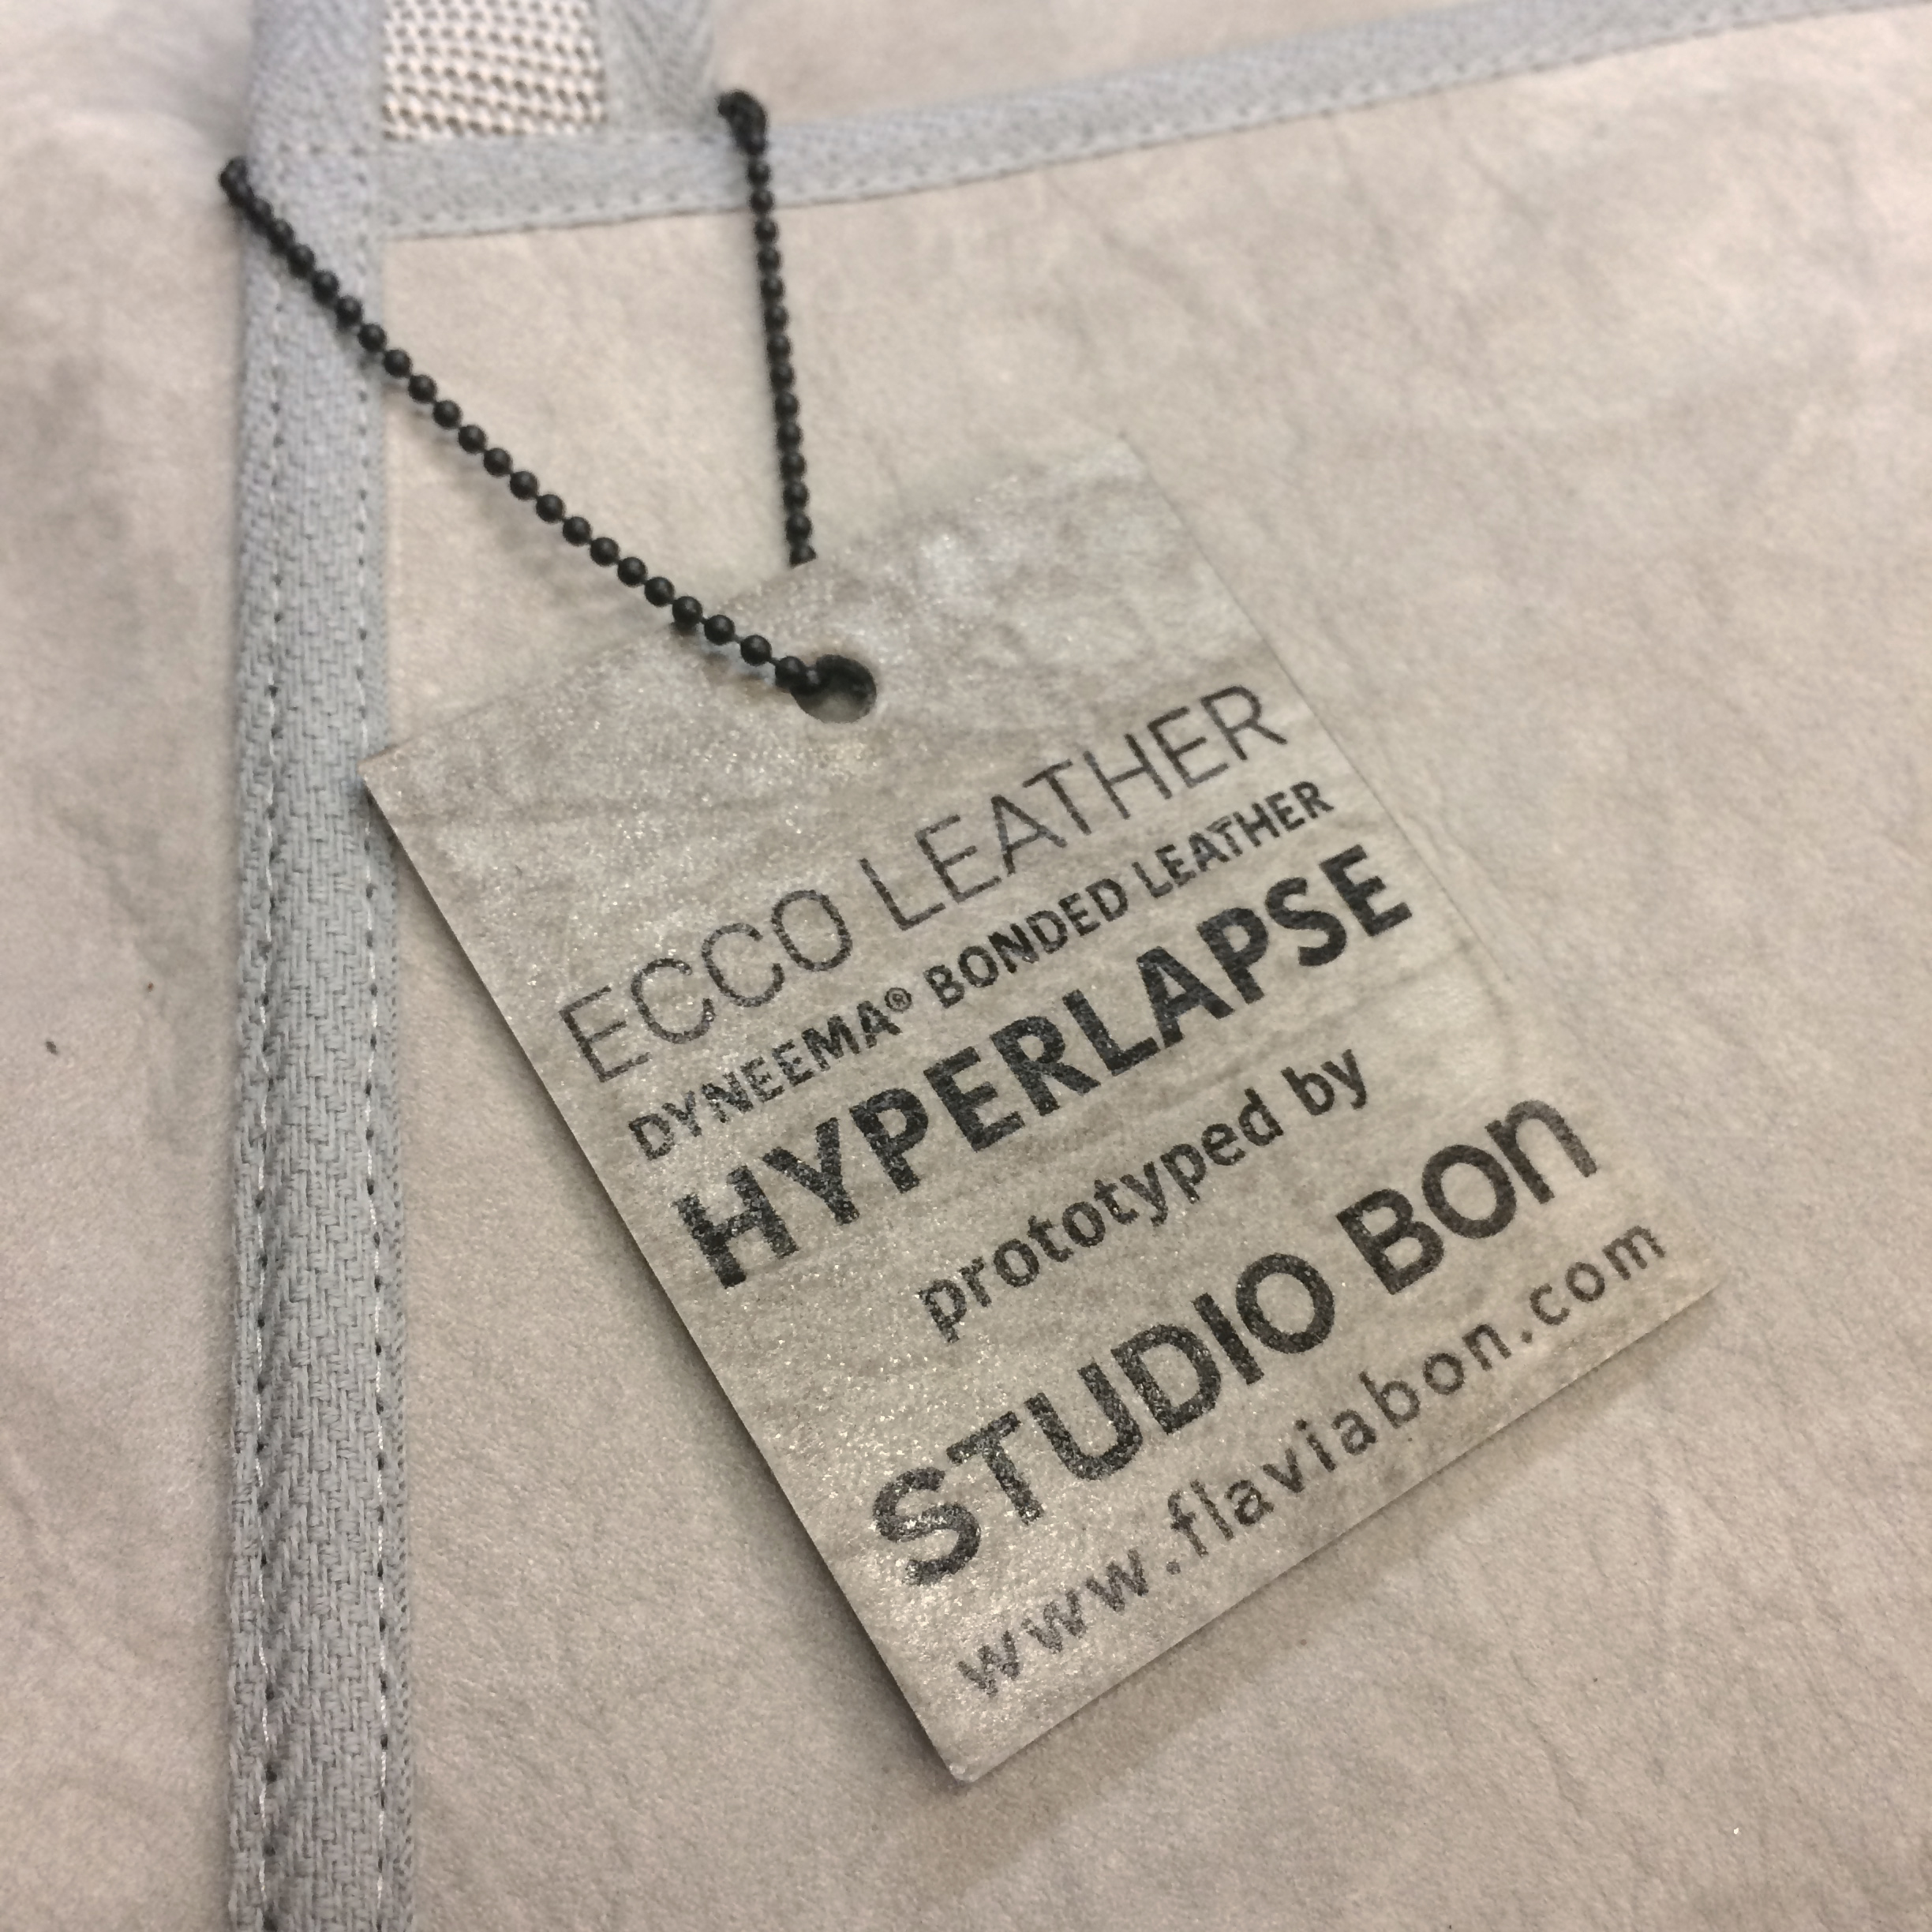 Paper-thin and super strong leather is bonded with Dyneema -  MaterialDistrict